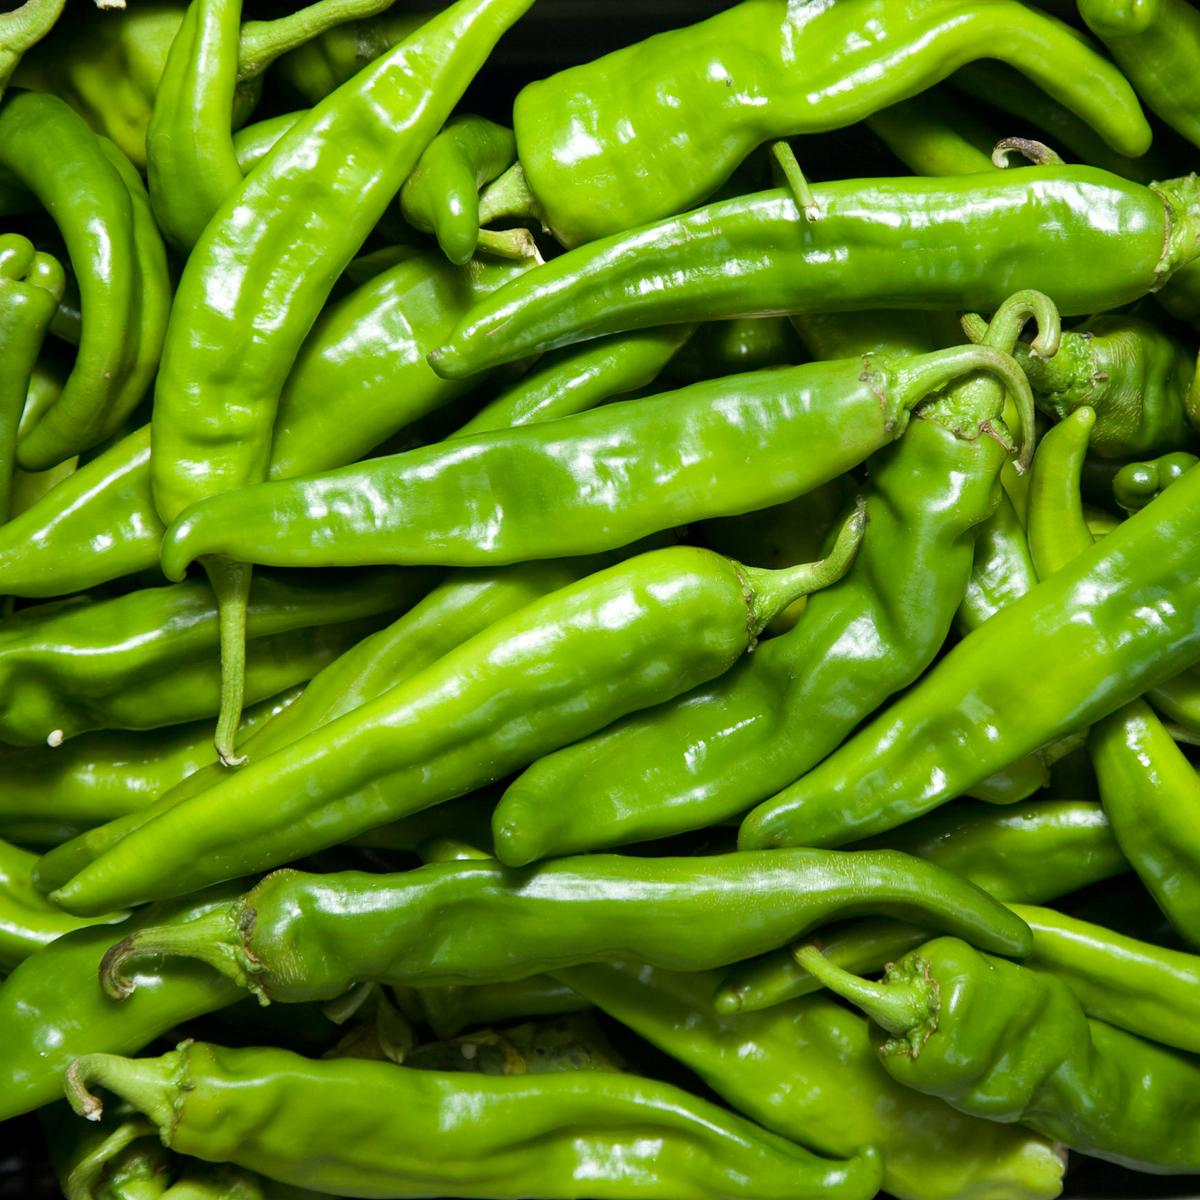 Farm Fresh Hatch Green Chile The Hatch Chile Store